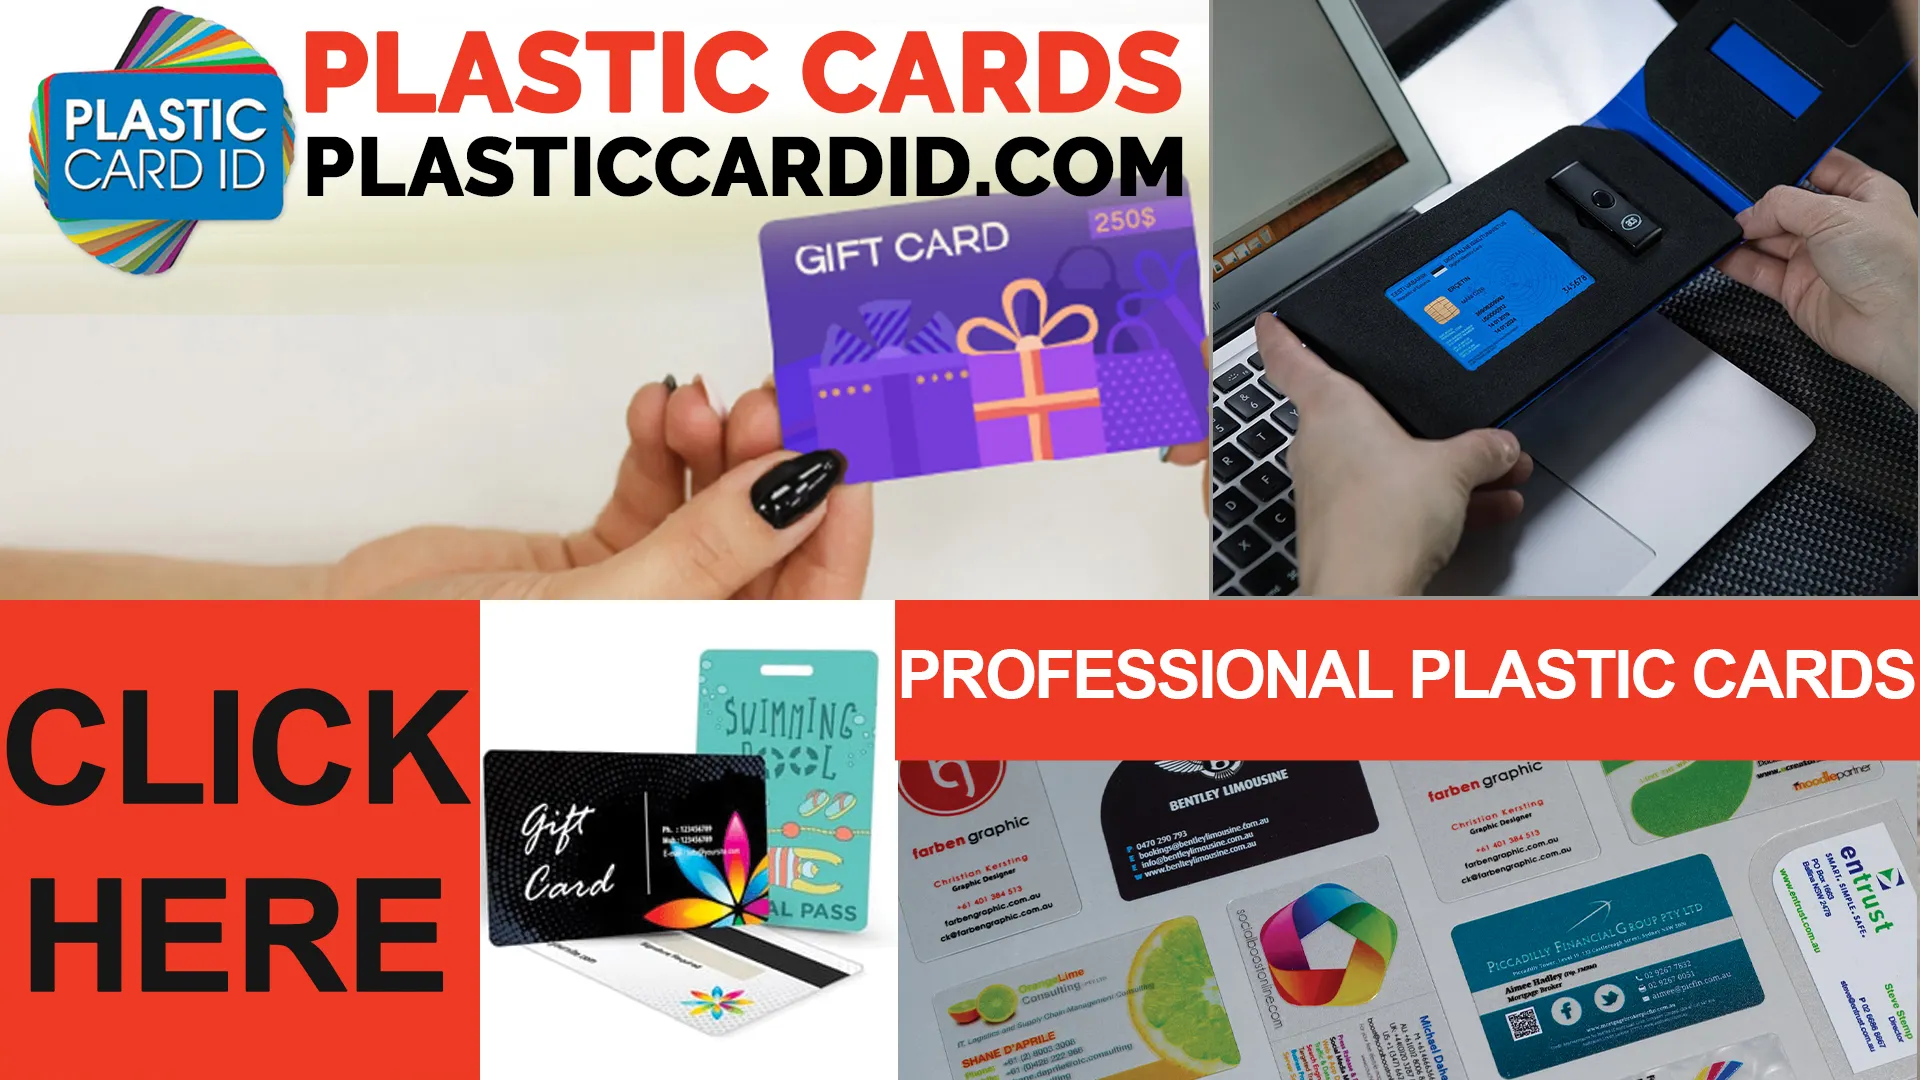 Welcome to the World of Durable Plastic Cards!